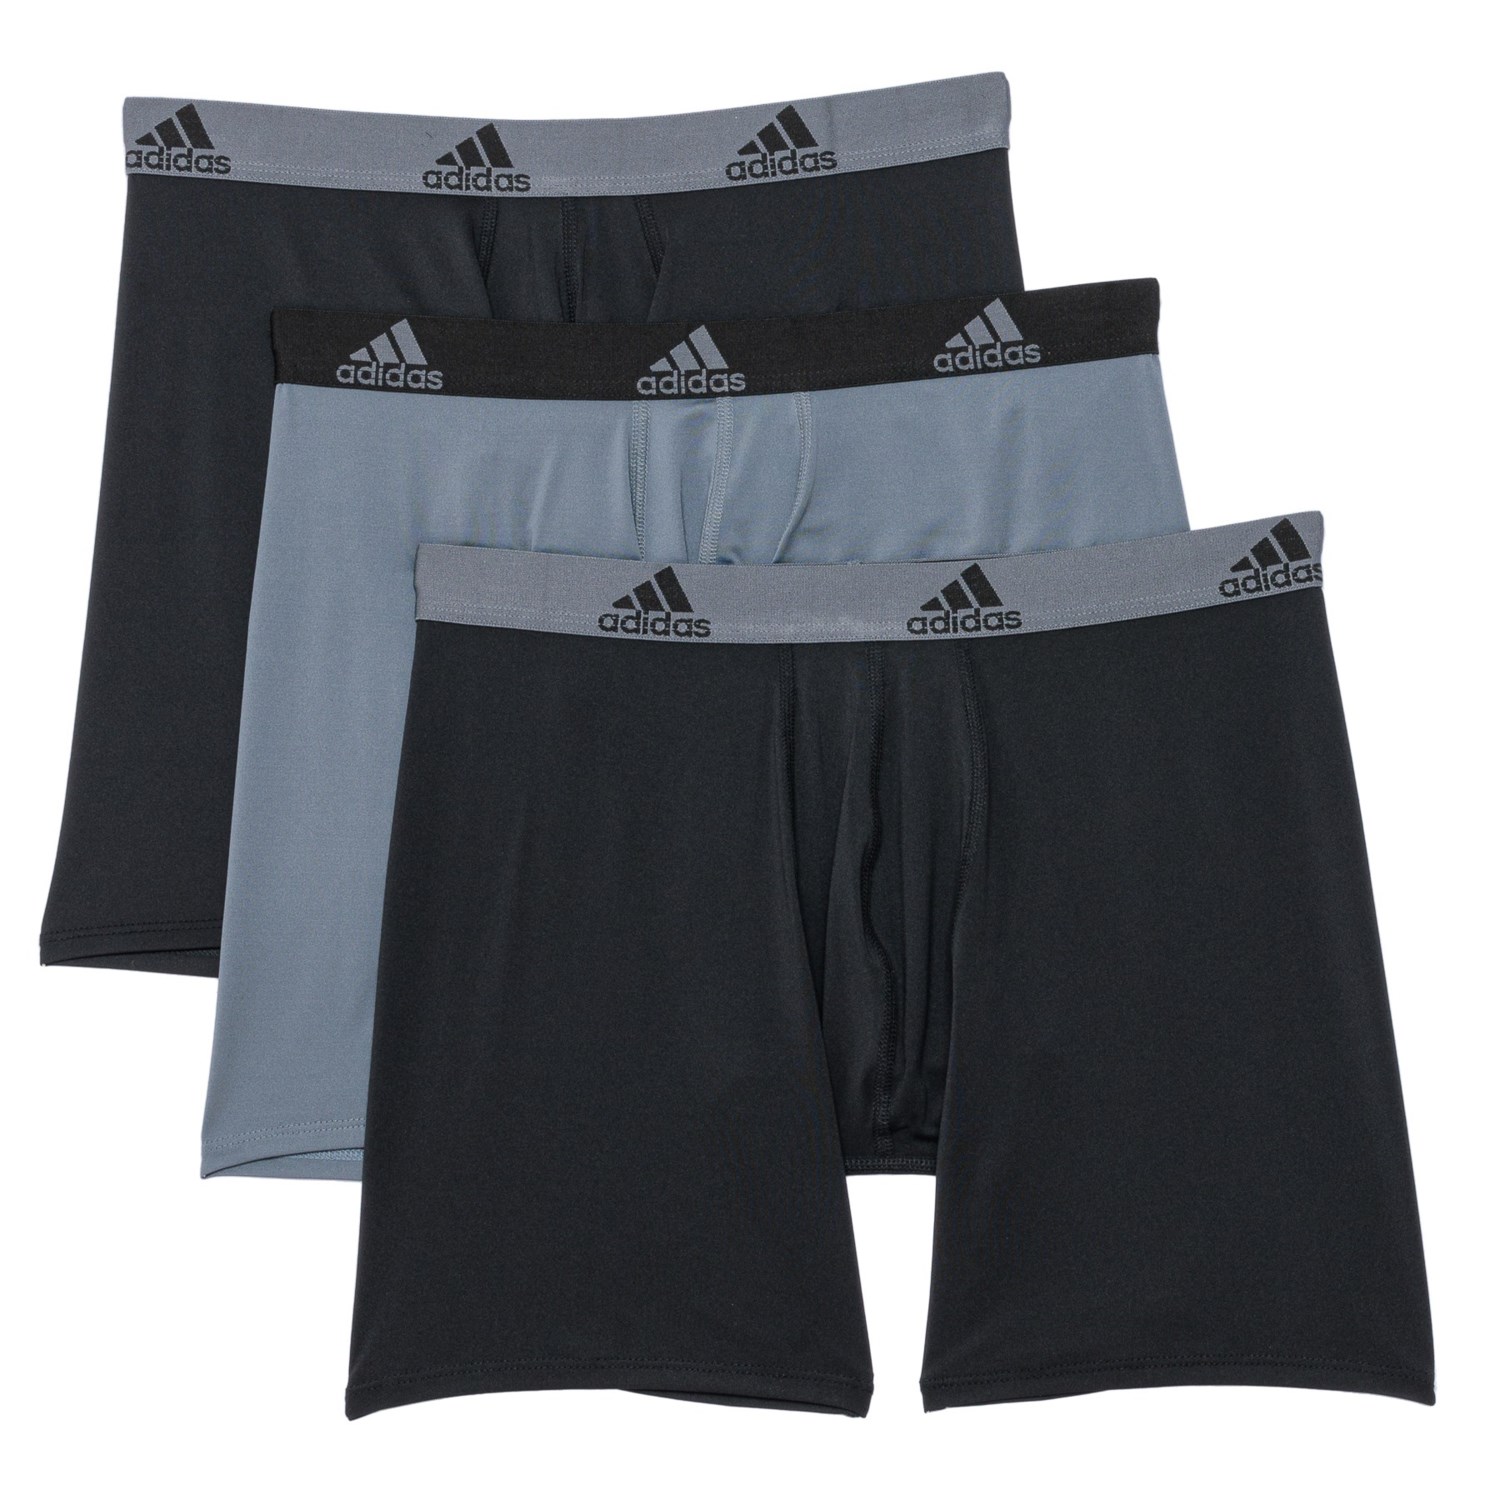 adidas Core-Performance Boxer - Briefs 46% Save - 3-Pack